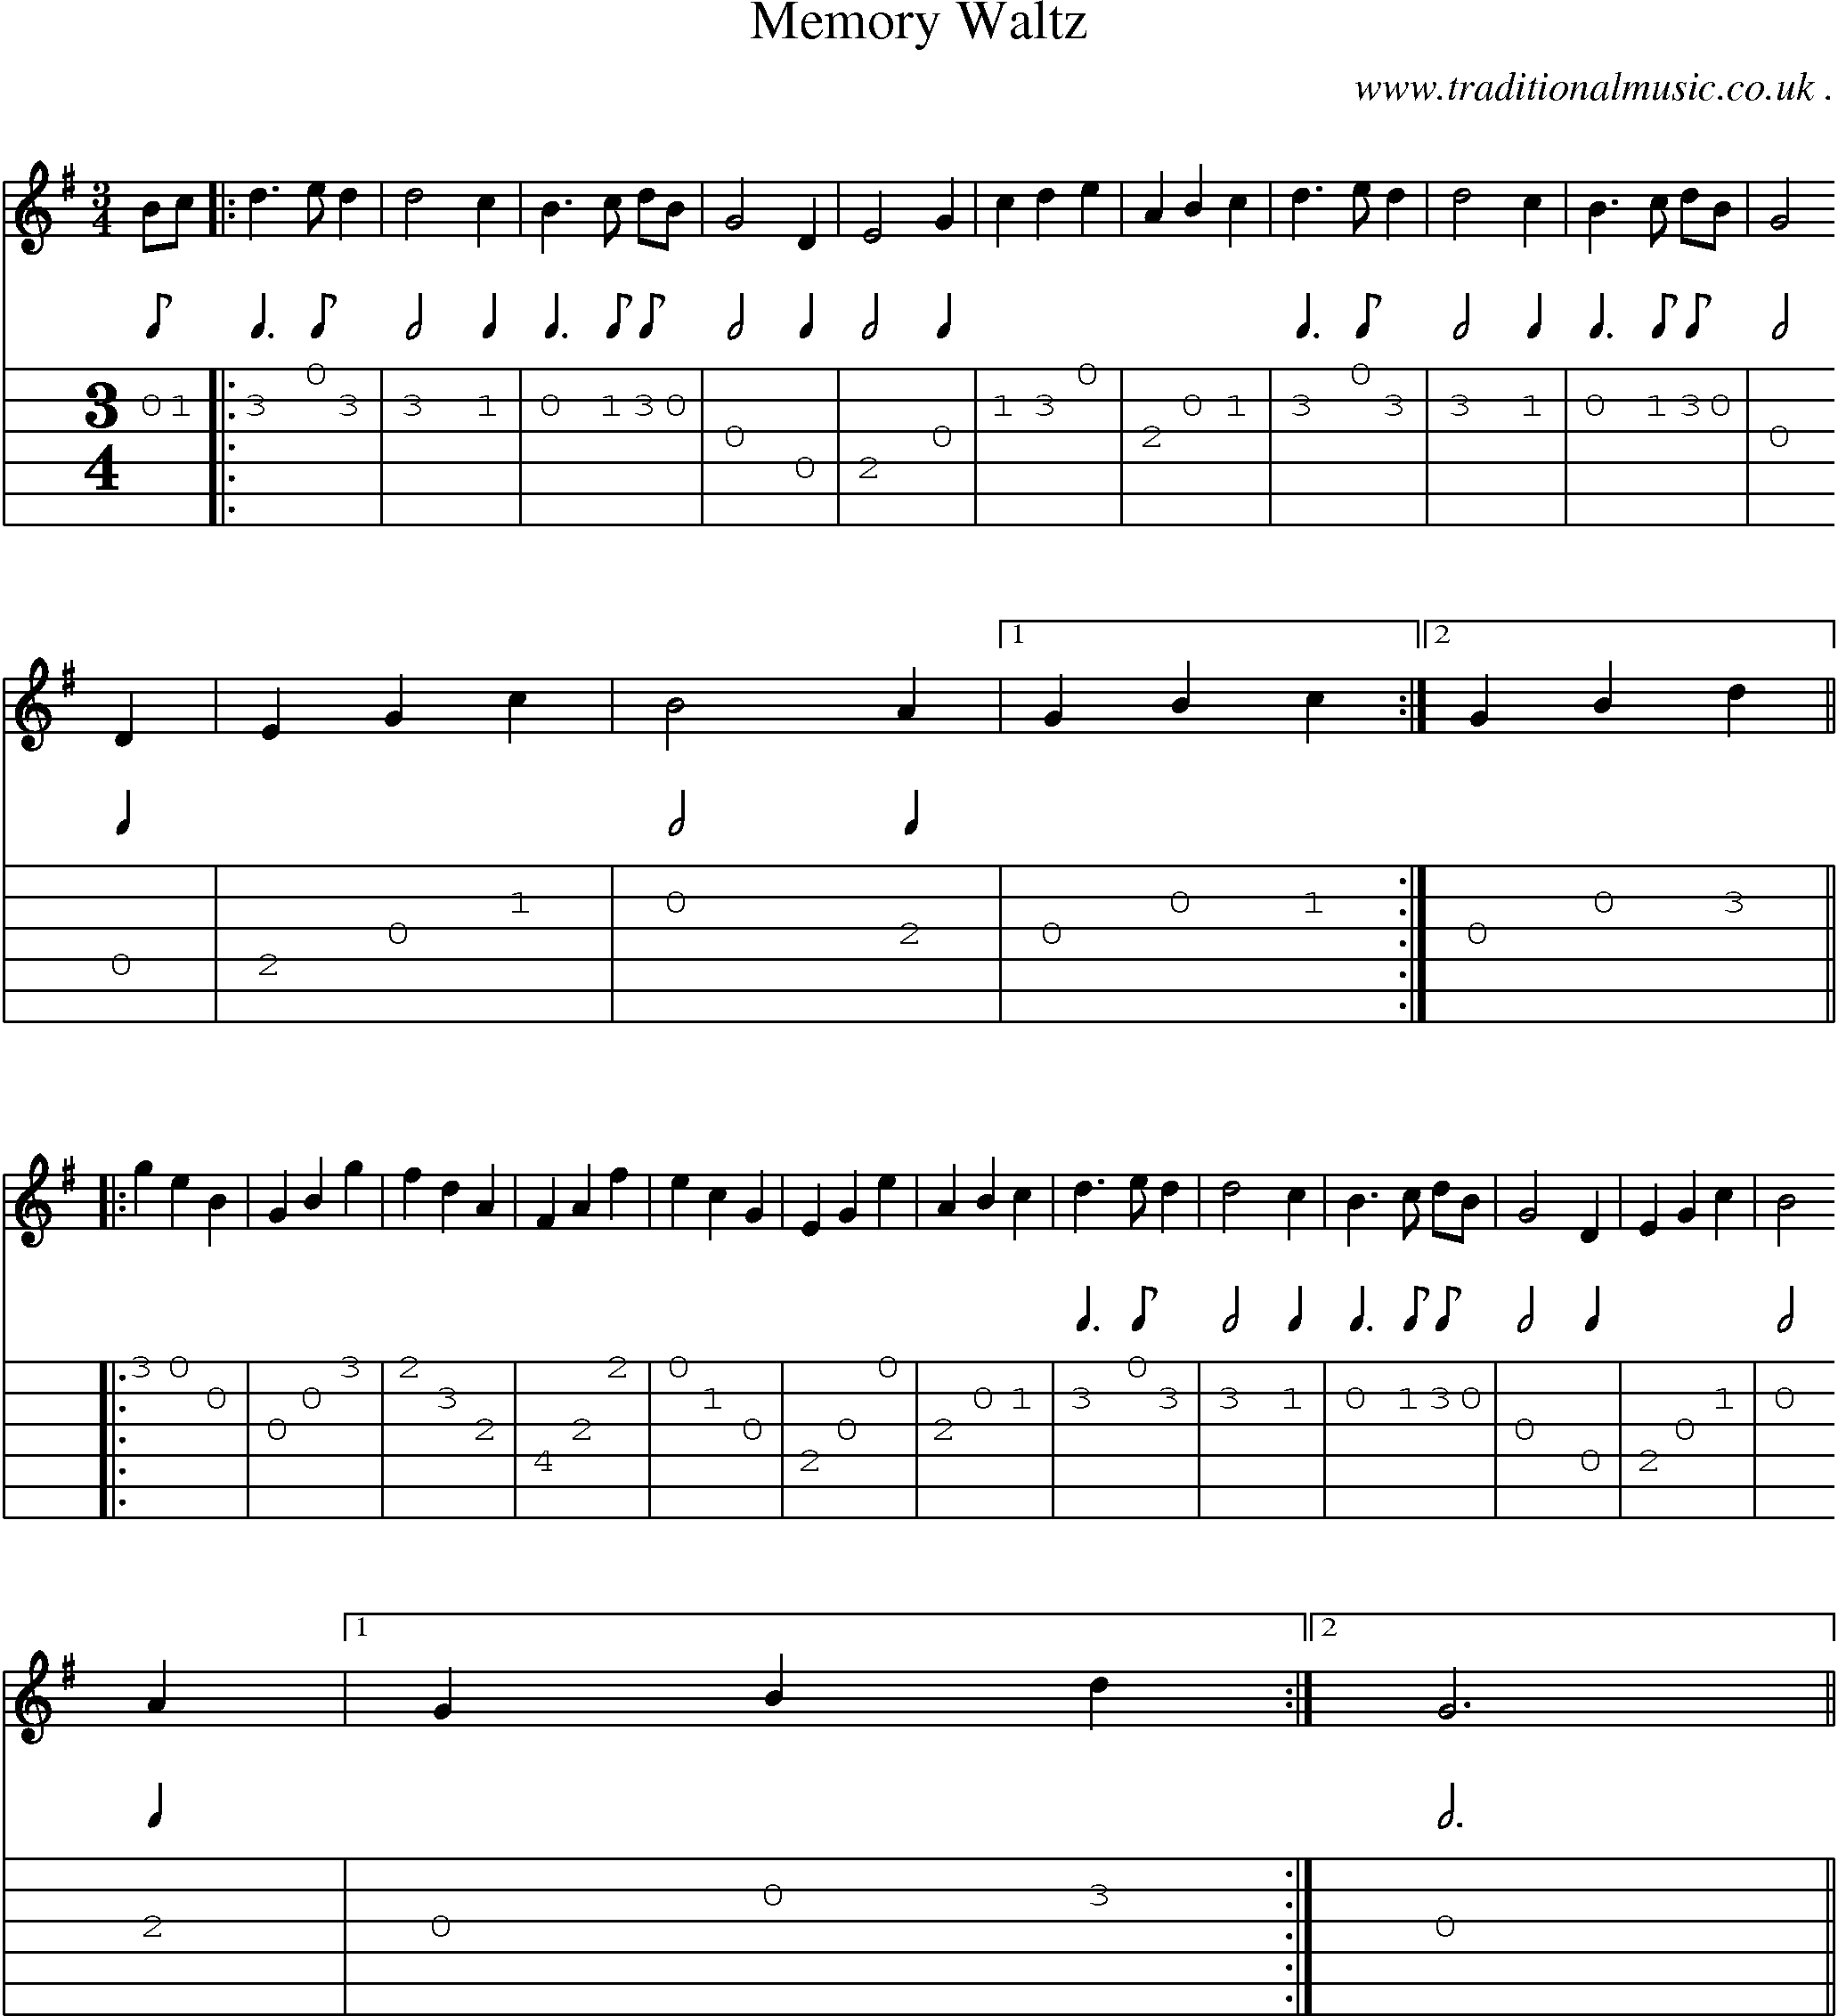 Sheet-Music and Guitar Tabs for Memory Waltz